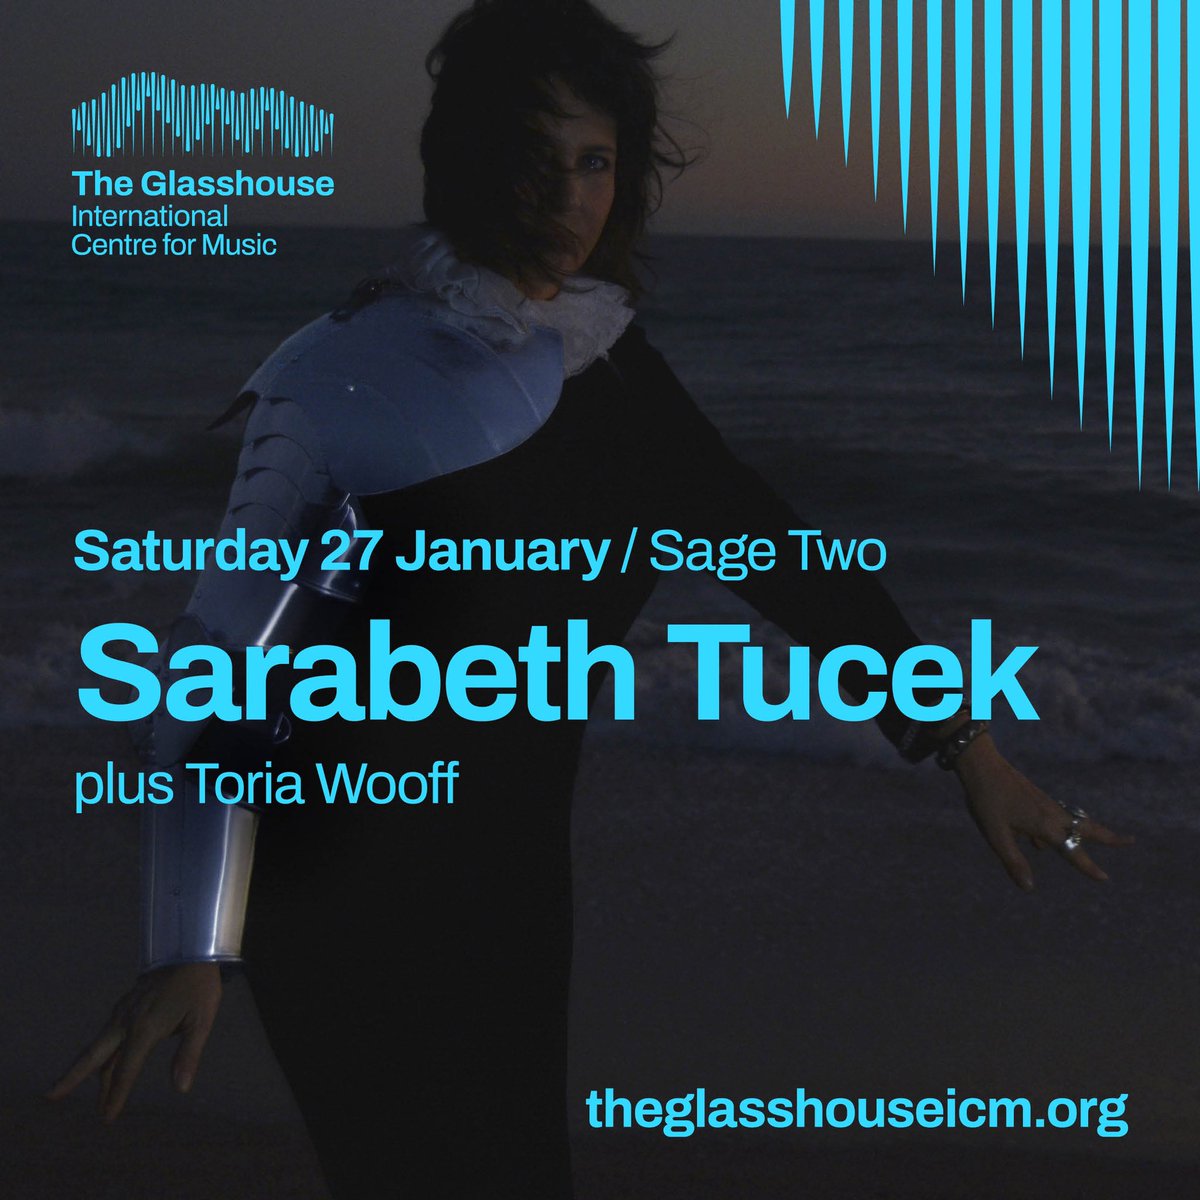 This weekend I’ll be heading north and opening a couple of shows for the incredible @sarabethtucek 🖤 26/01 GLASGOW - @thehugandpint (for @ccfest) 27/01 GATESHEAD - @glasshouseicm Tickets available from toriawooff.com ✨